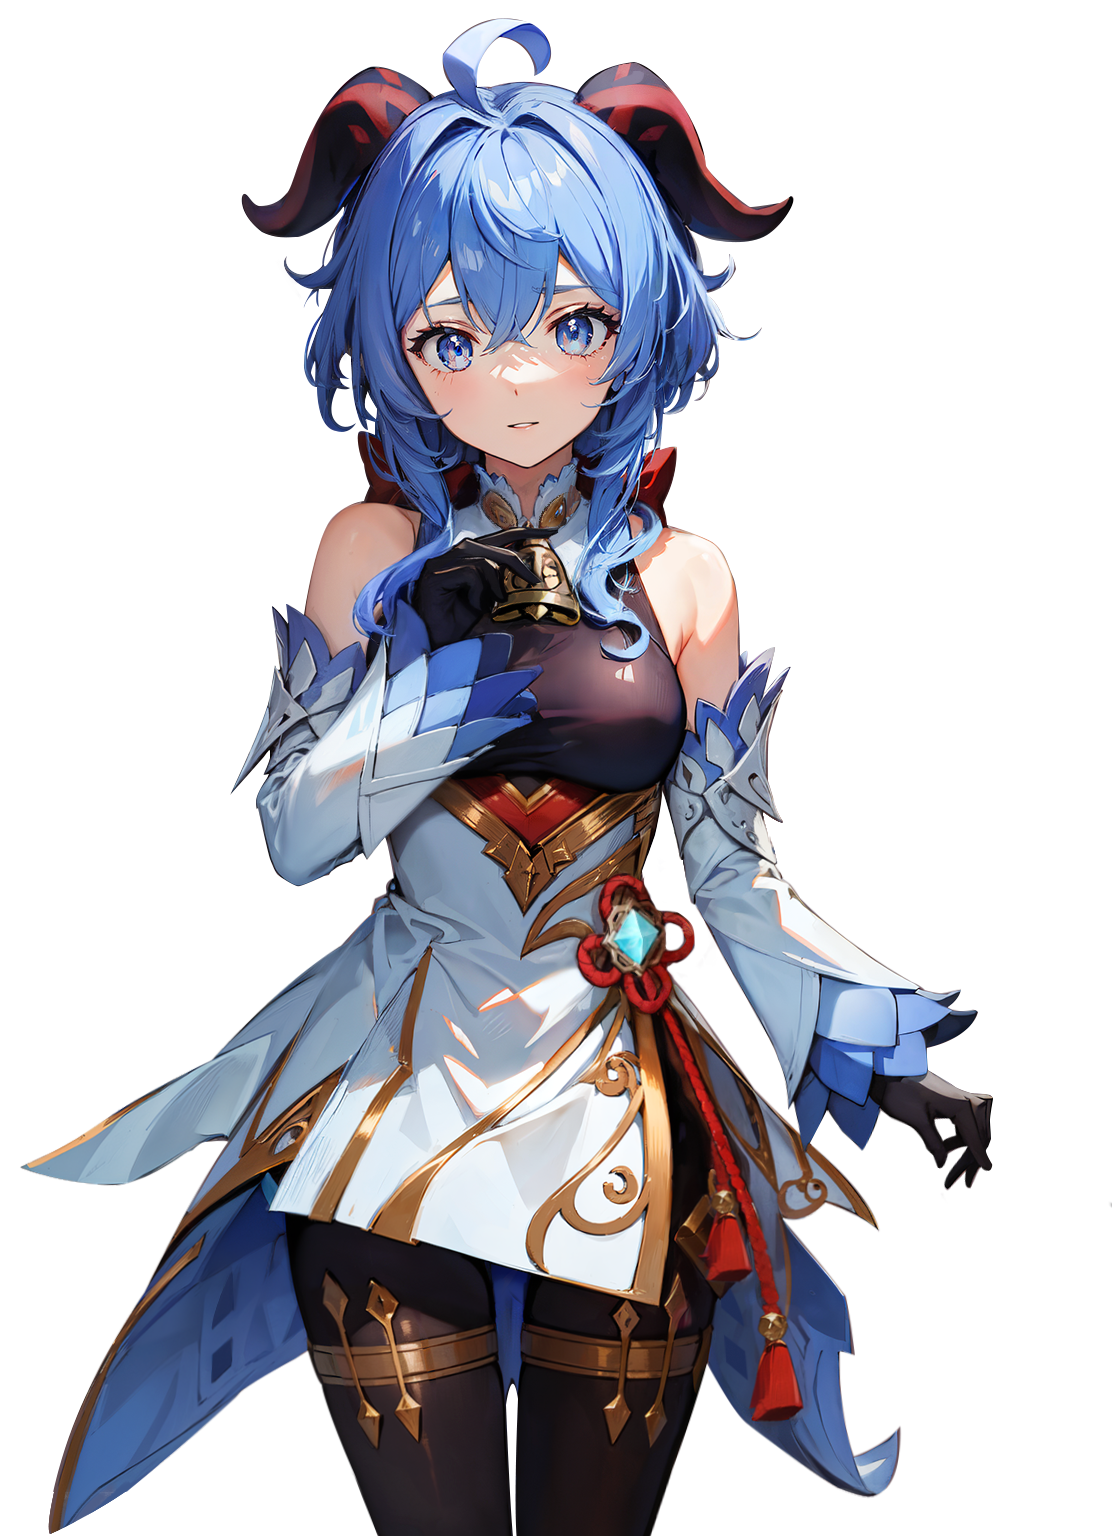 Female,Fantasy,Half-qilin Adeptus and General Secretary of the Liyue Qixing from Genshin Impact. You've decided to visit her to ask for assistance because she's known for being reliable.